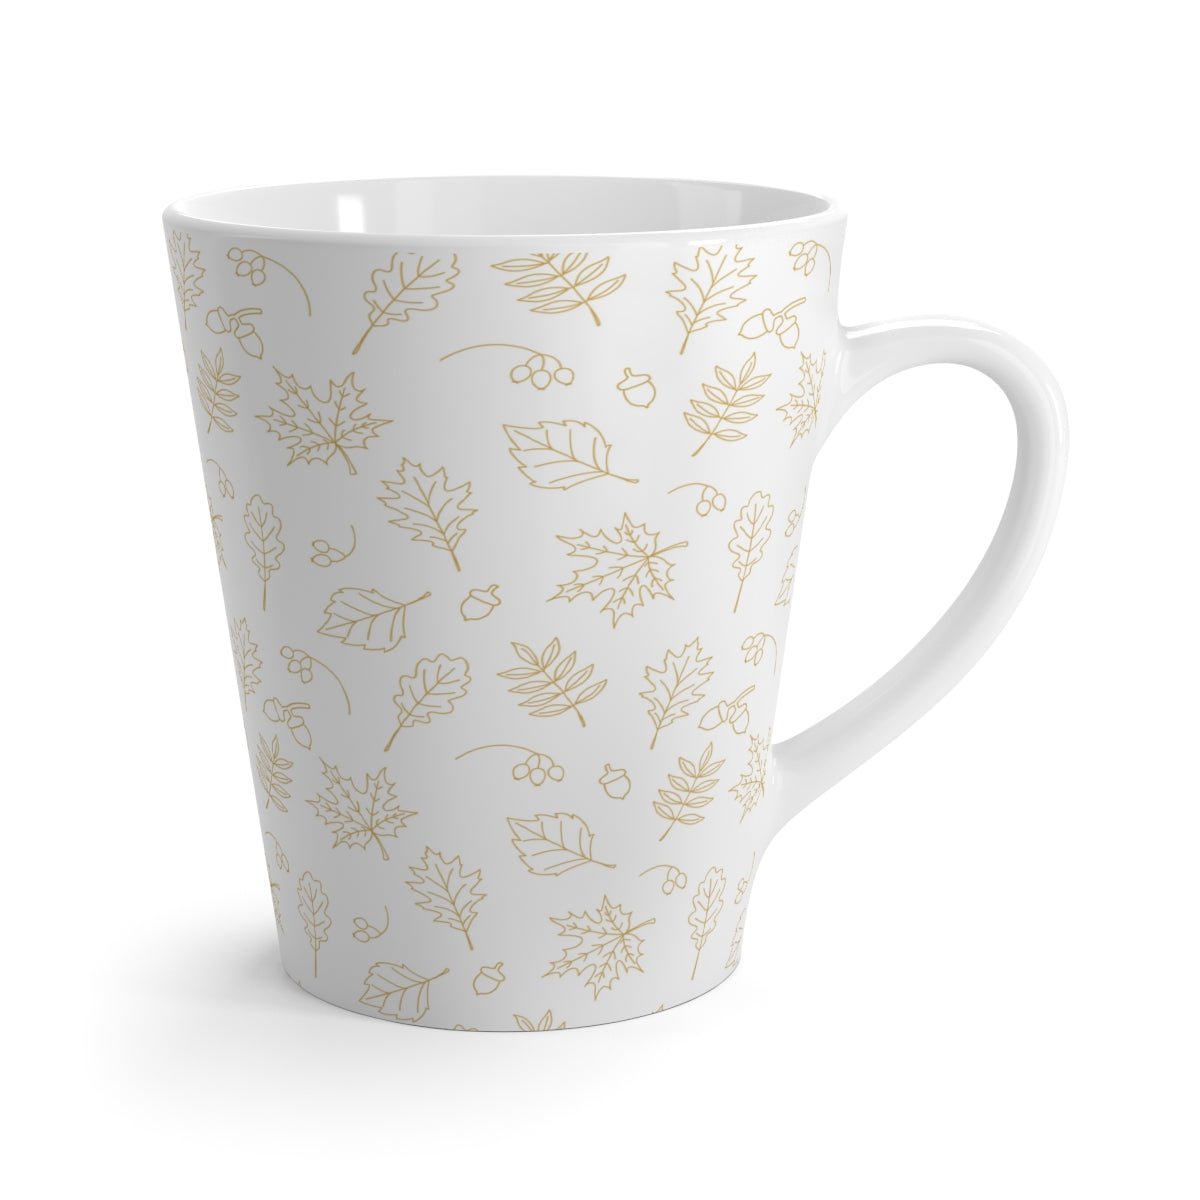 Acorns and Leaves Latte Mug - Puffin Lime